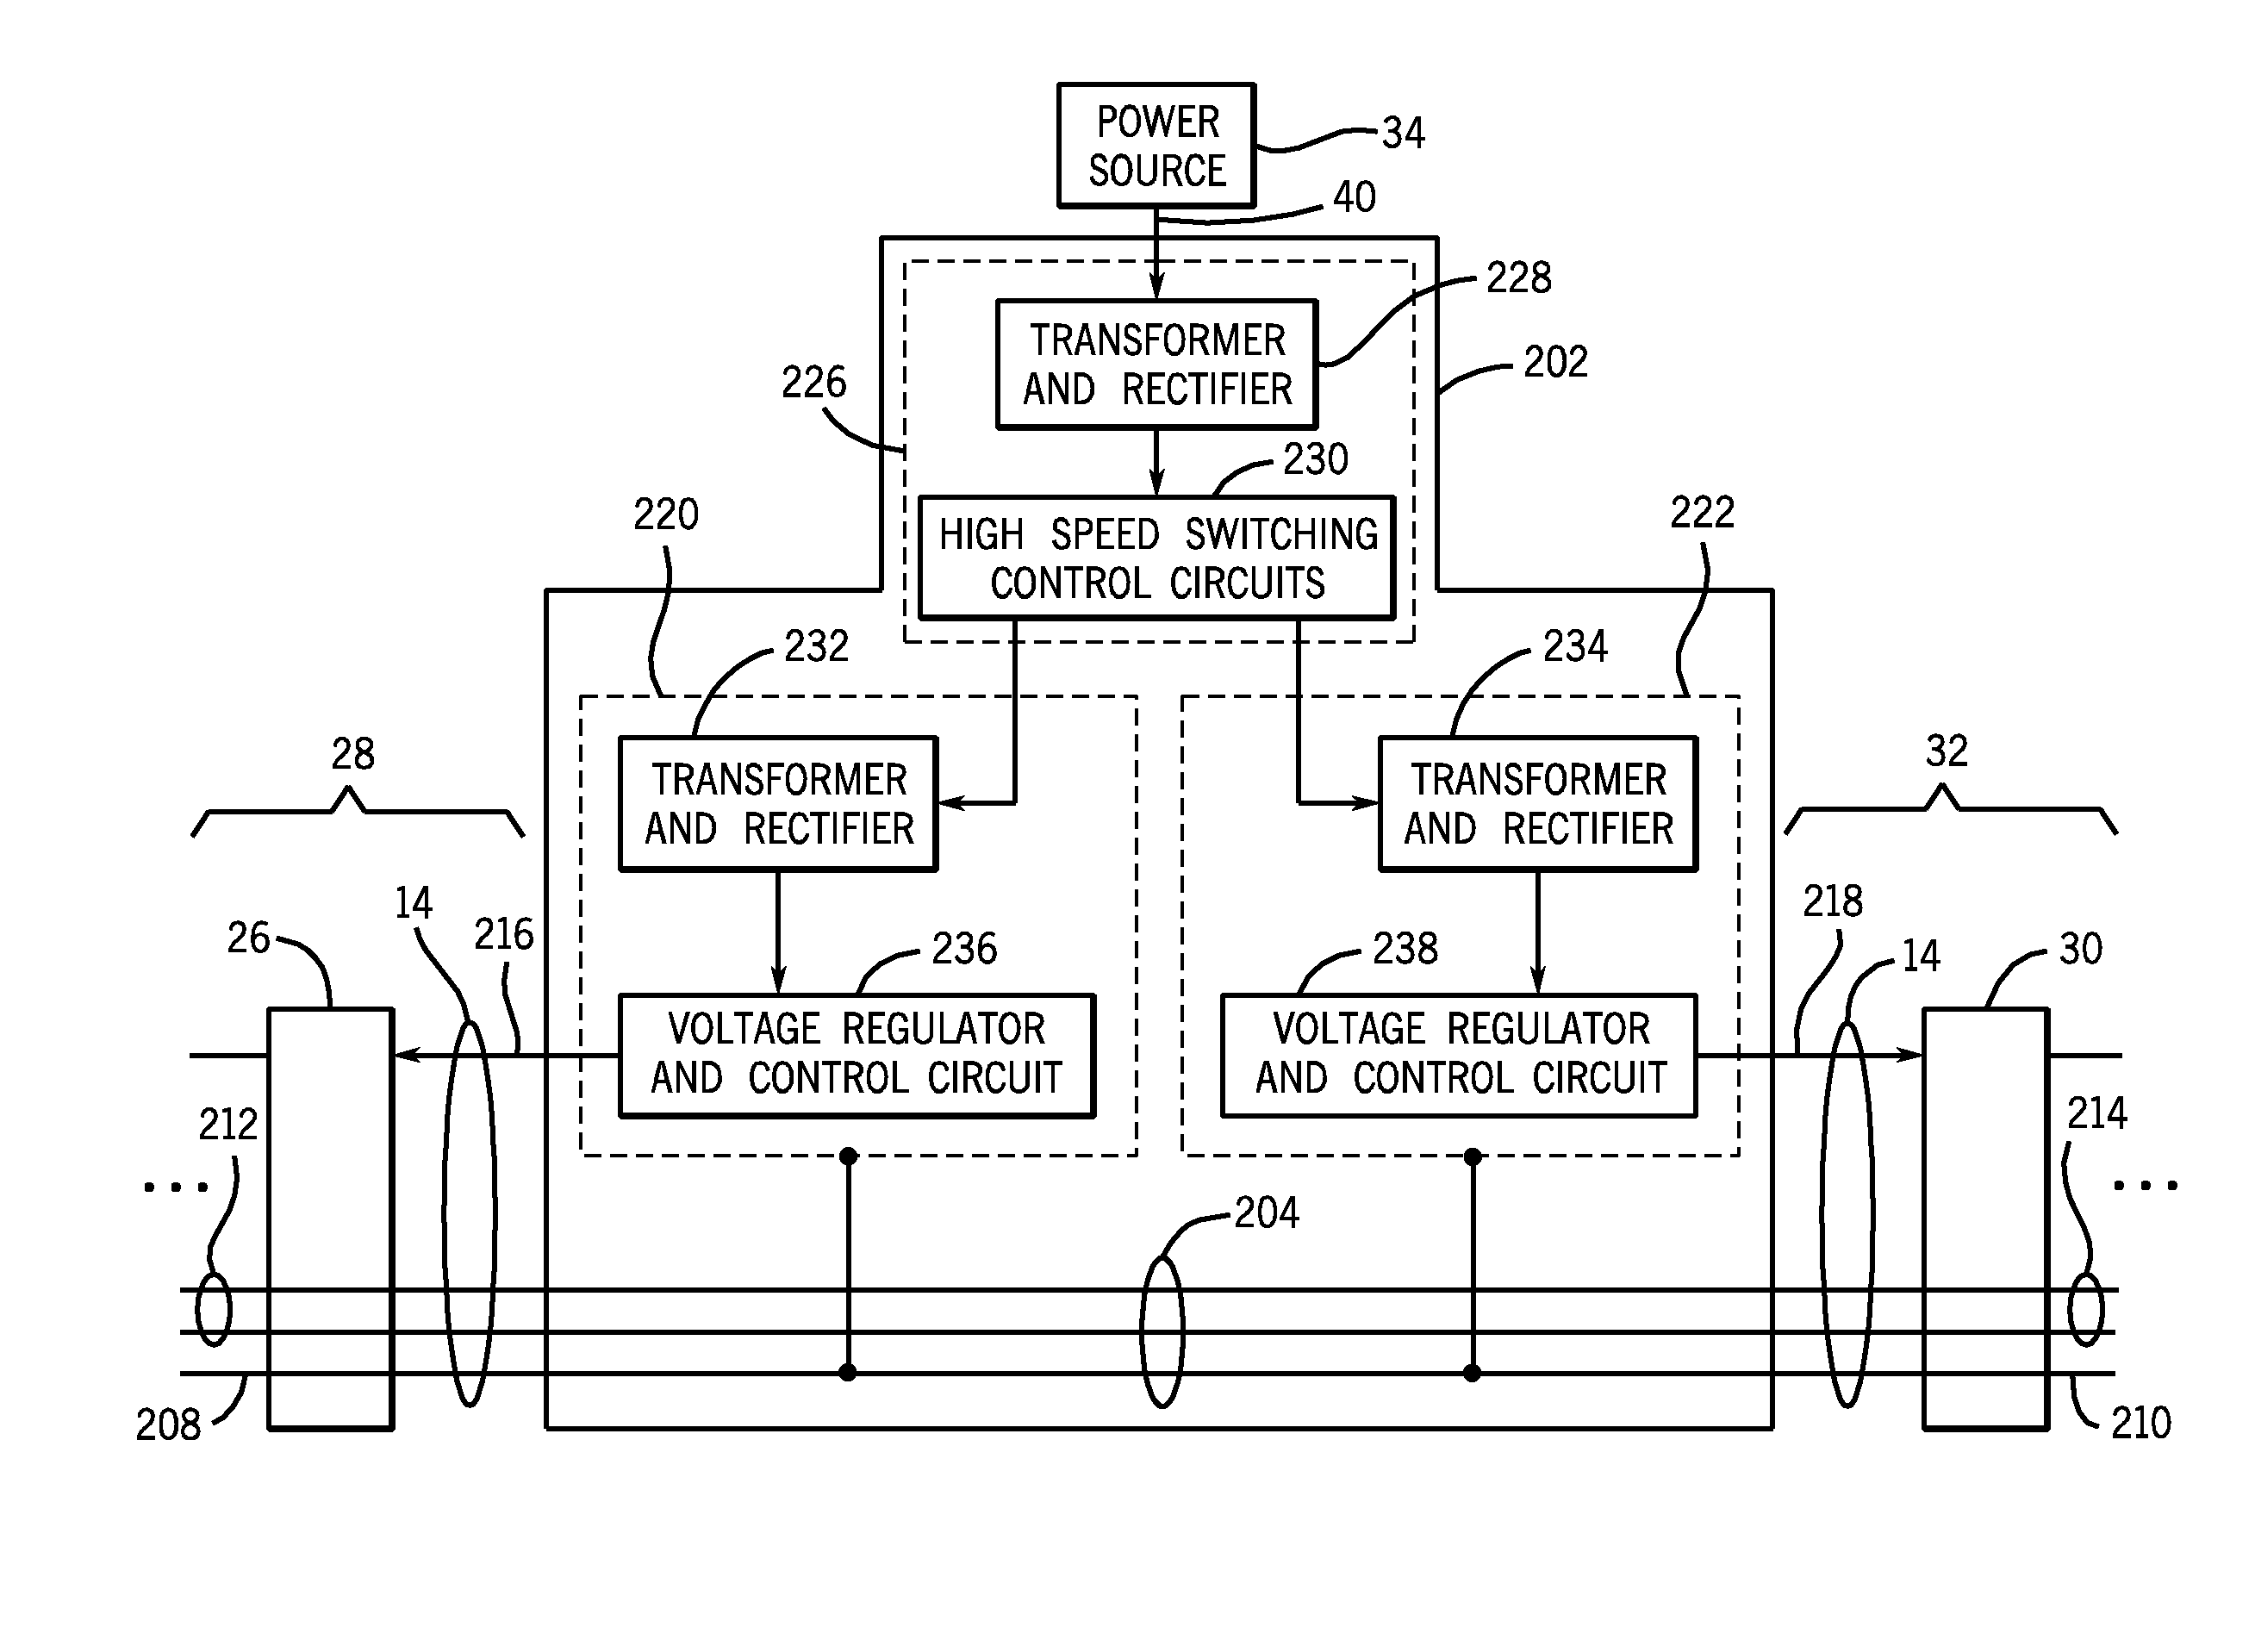 Single-input and dual-output power supply with integral coupling feature